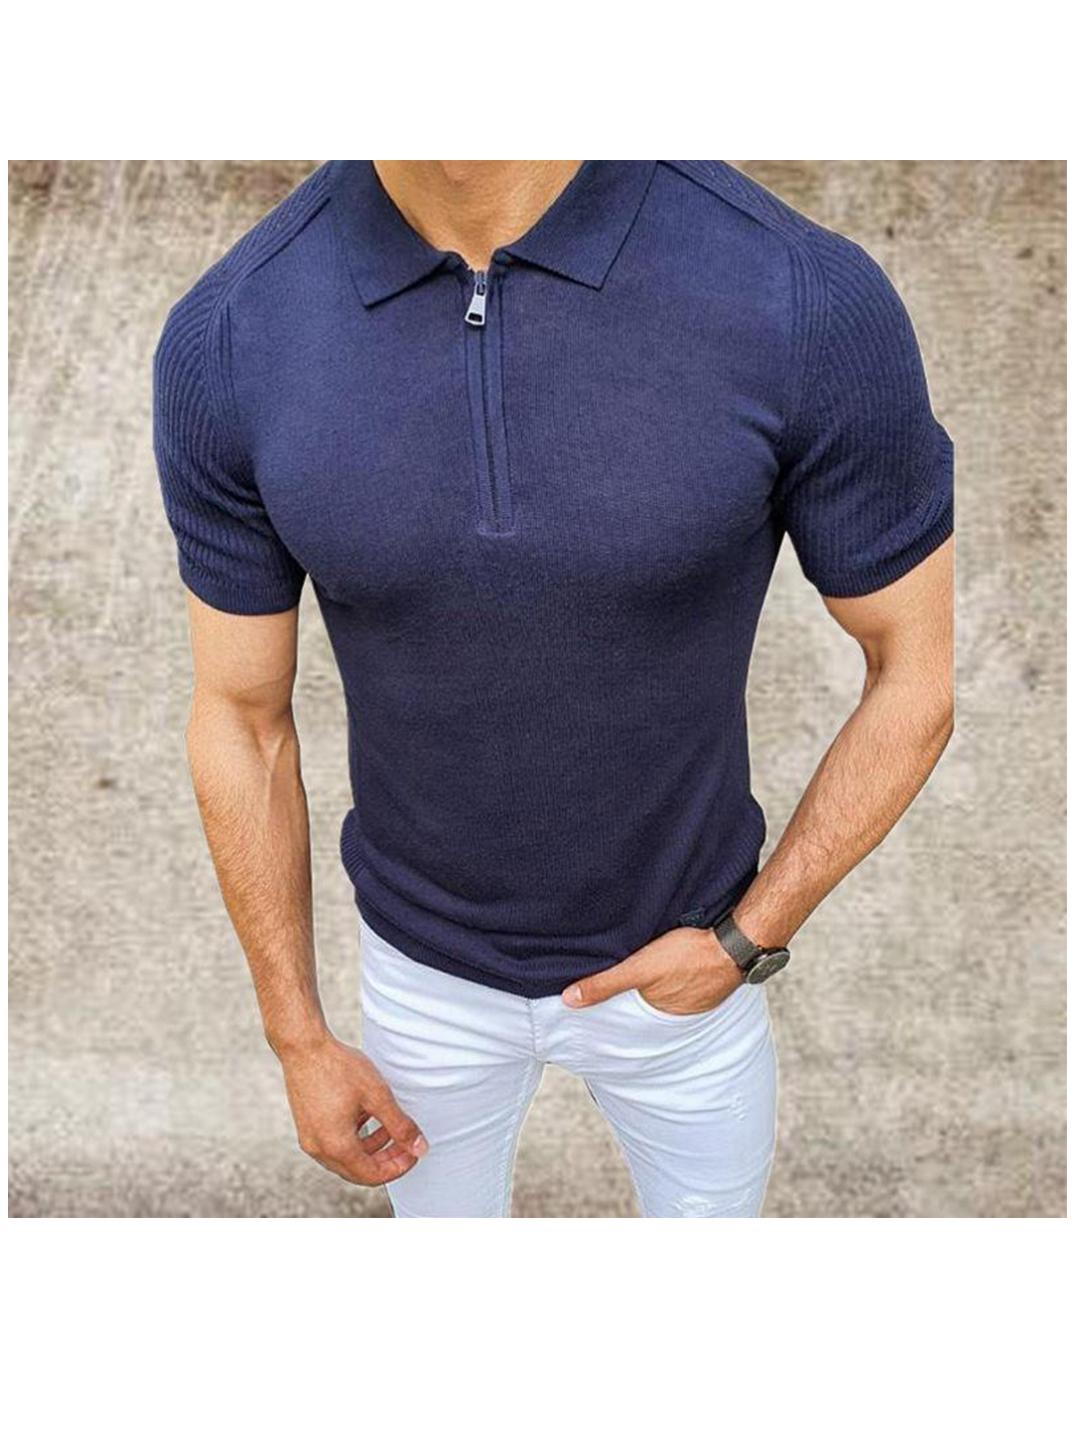 Men's Posey Solid Color Short-sleeved Slim Knitted Polo T-shirt-poisonstreetwear.com